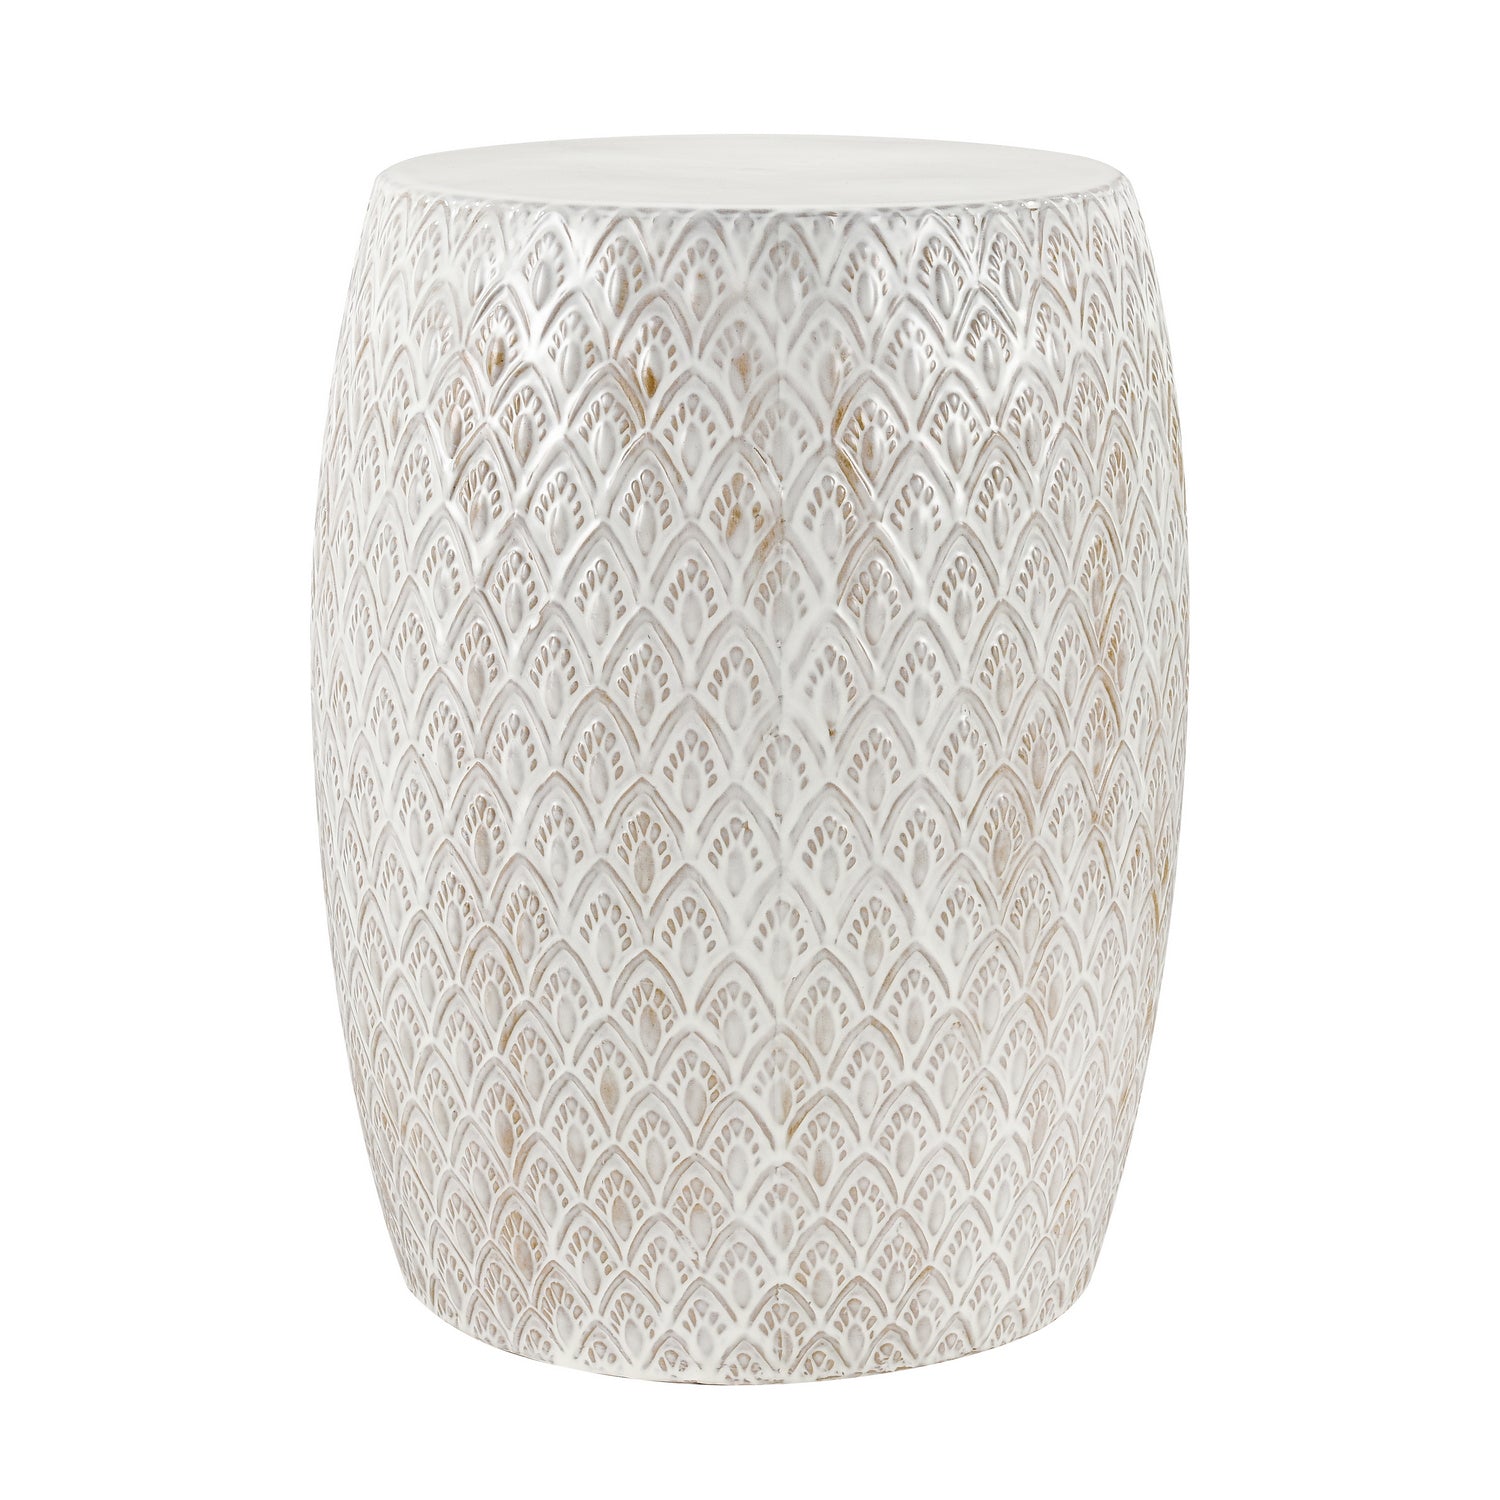 ELK Home - S0017-8119 - Accent Stool - Hollywell - Cream Glazed